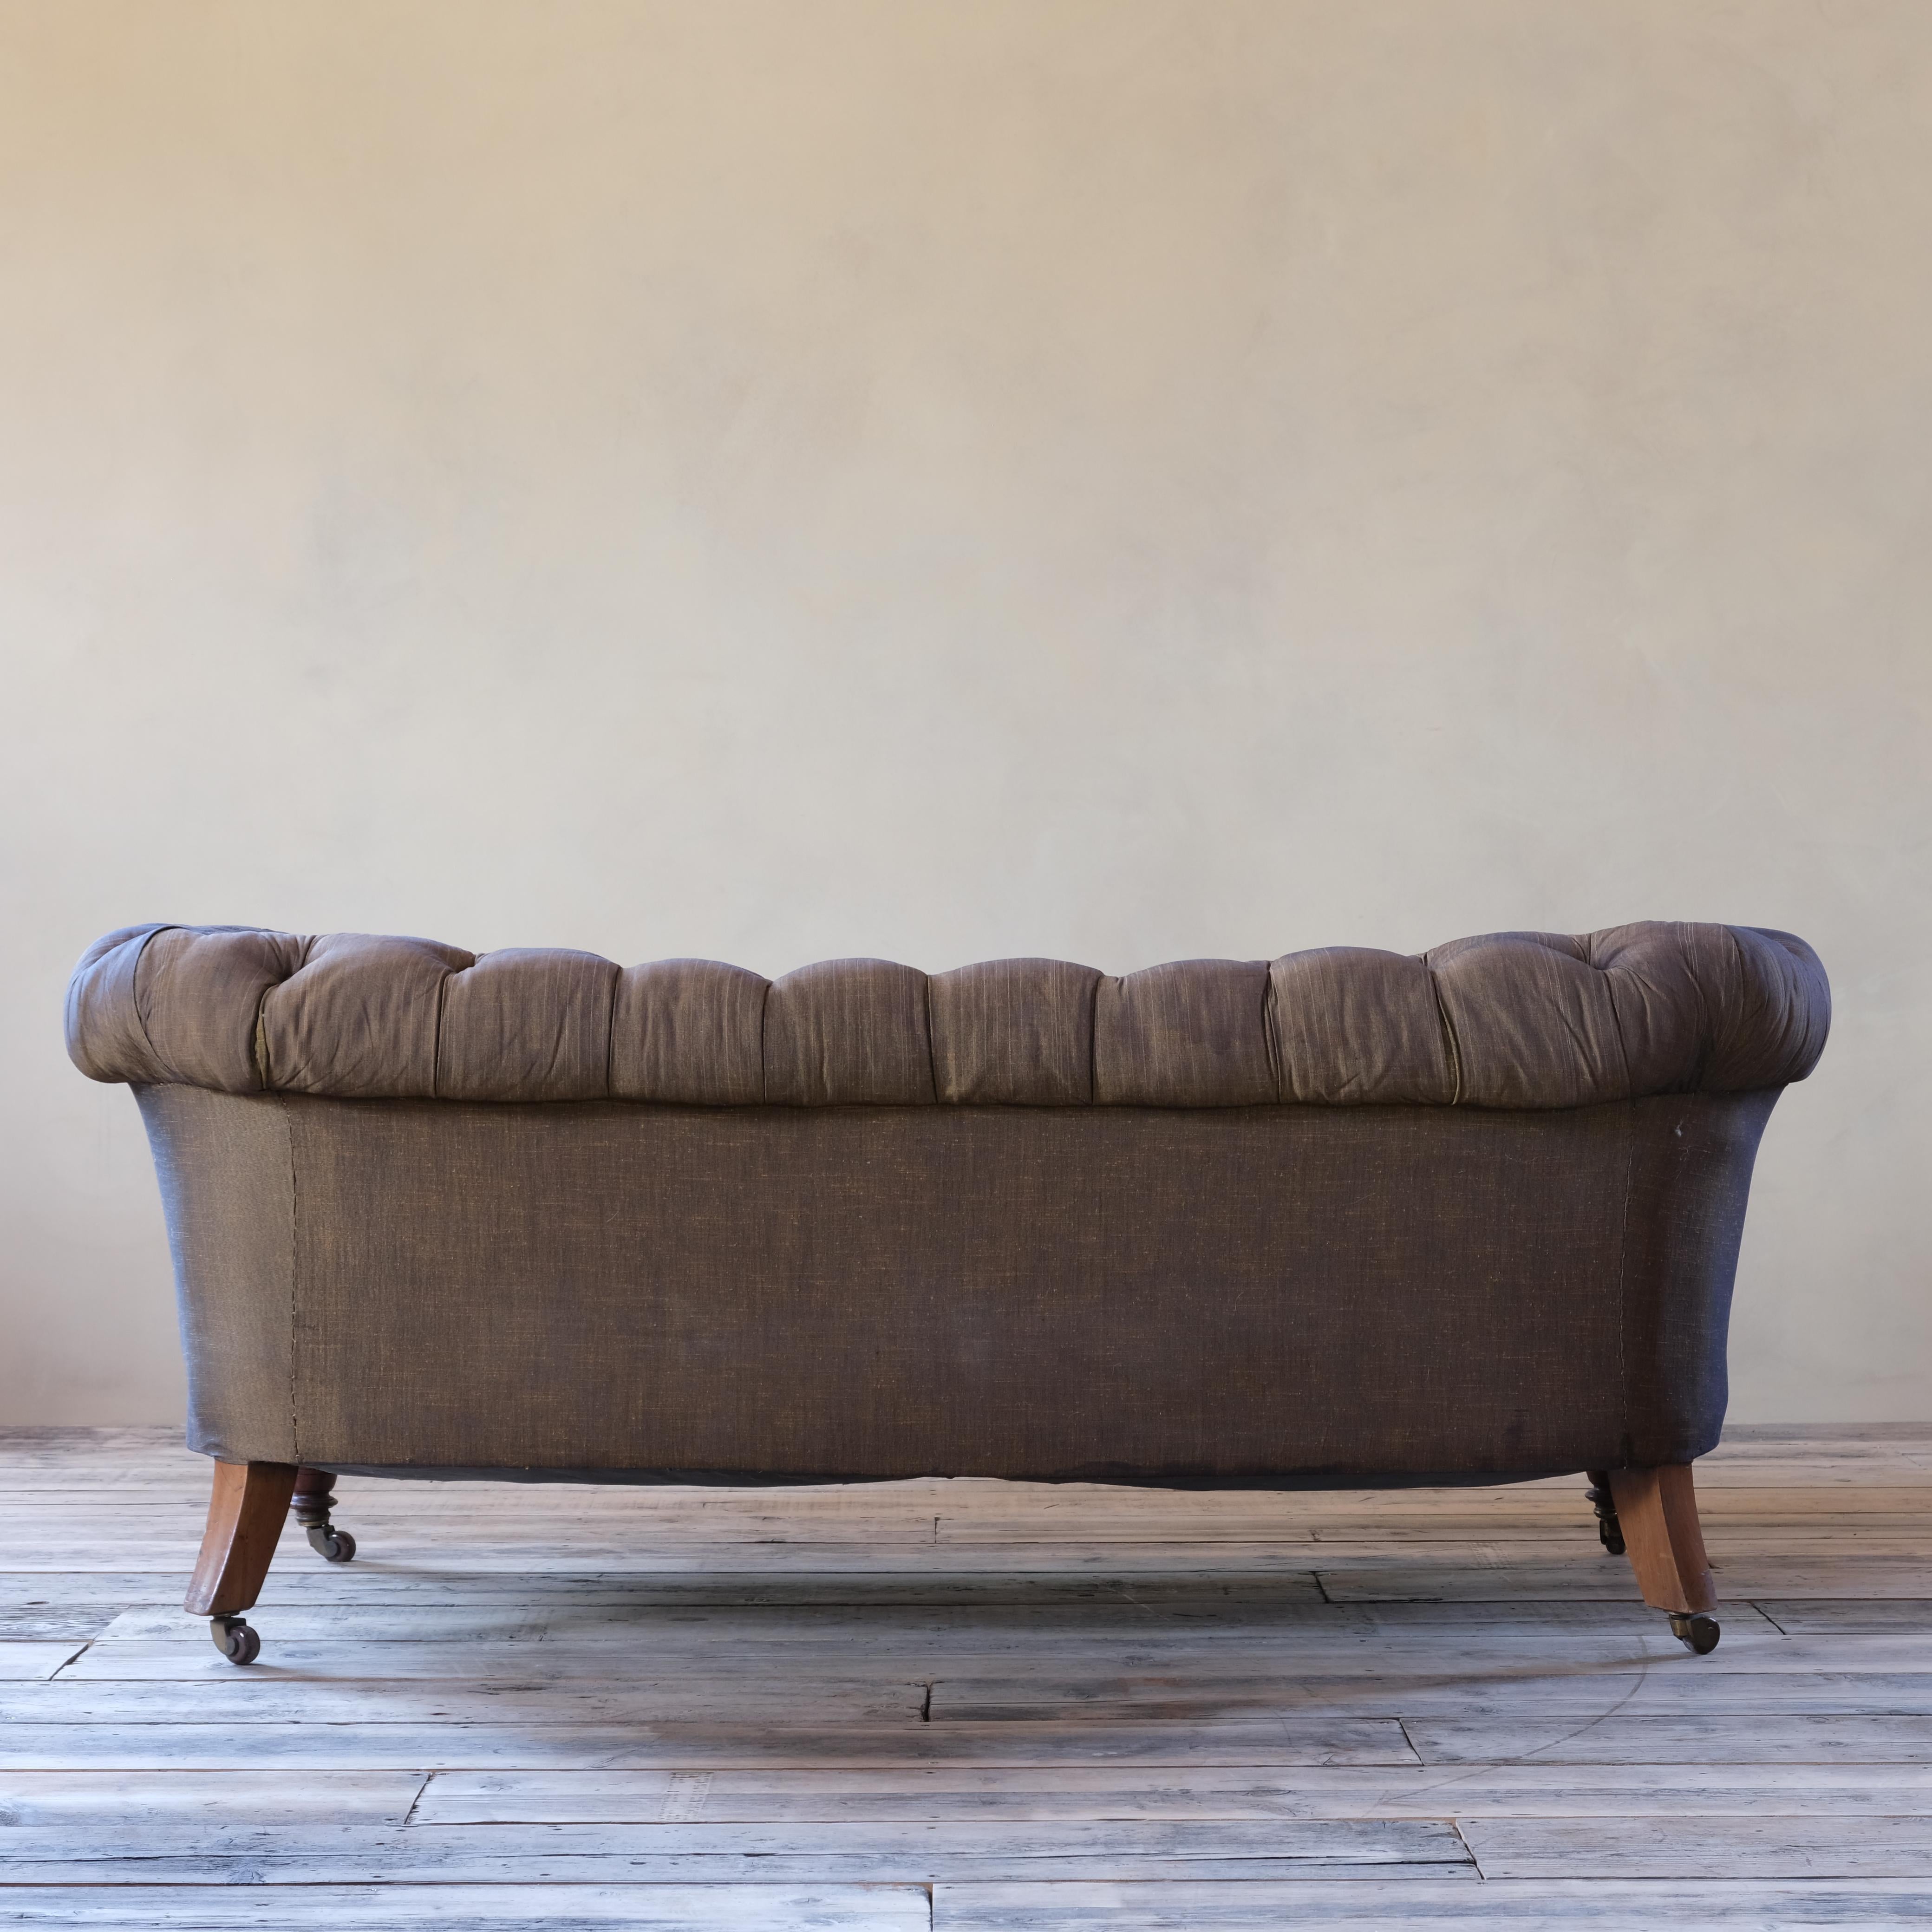 Walnut 19th Century Chesterfield Sofa by Hampton and Sons, London